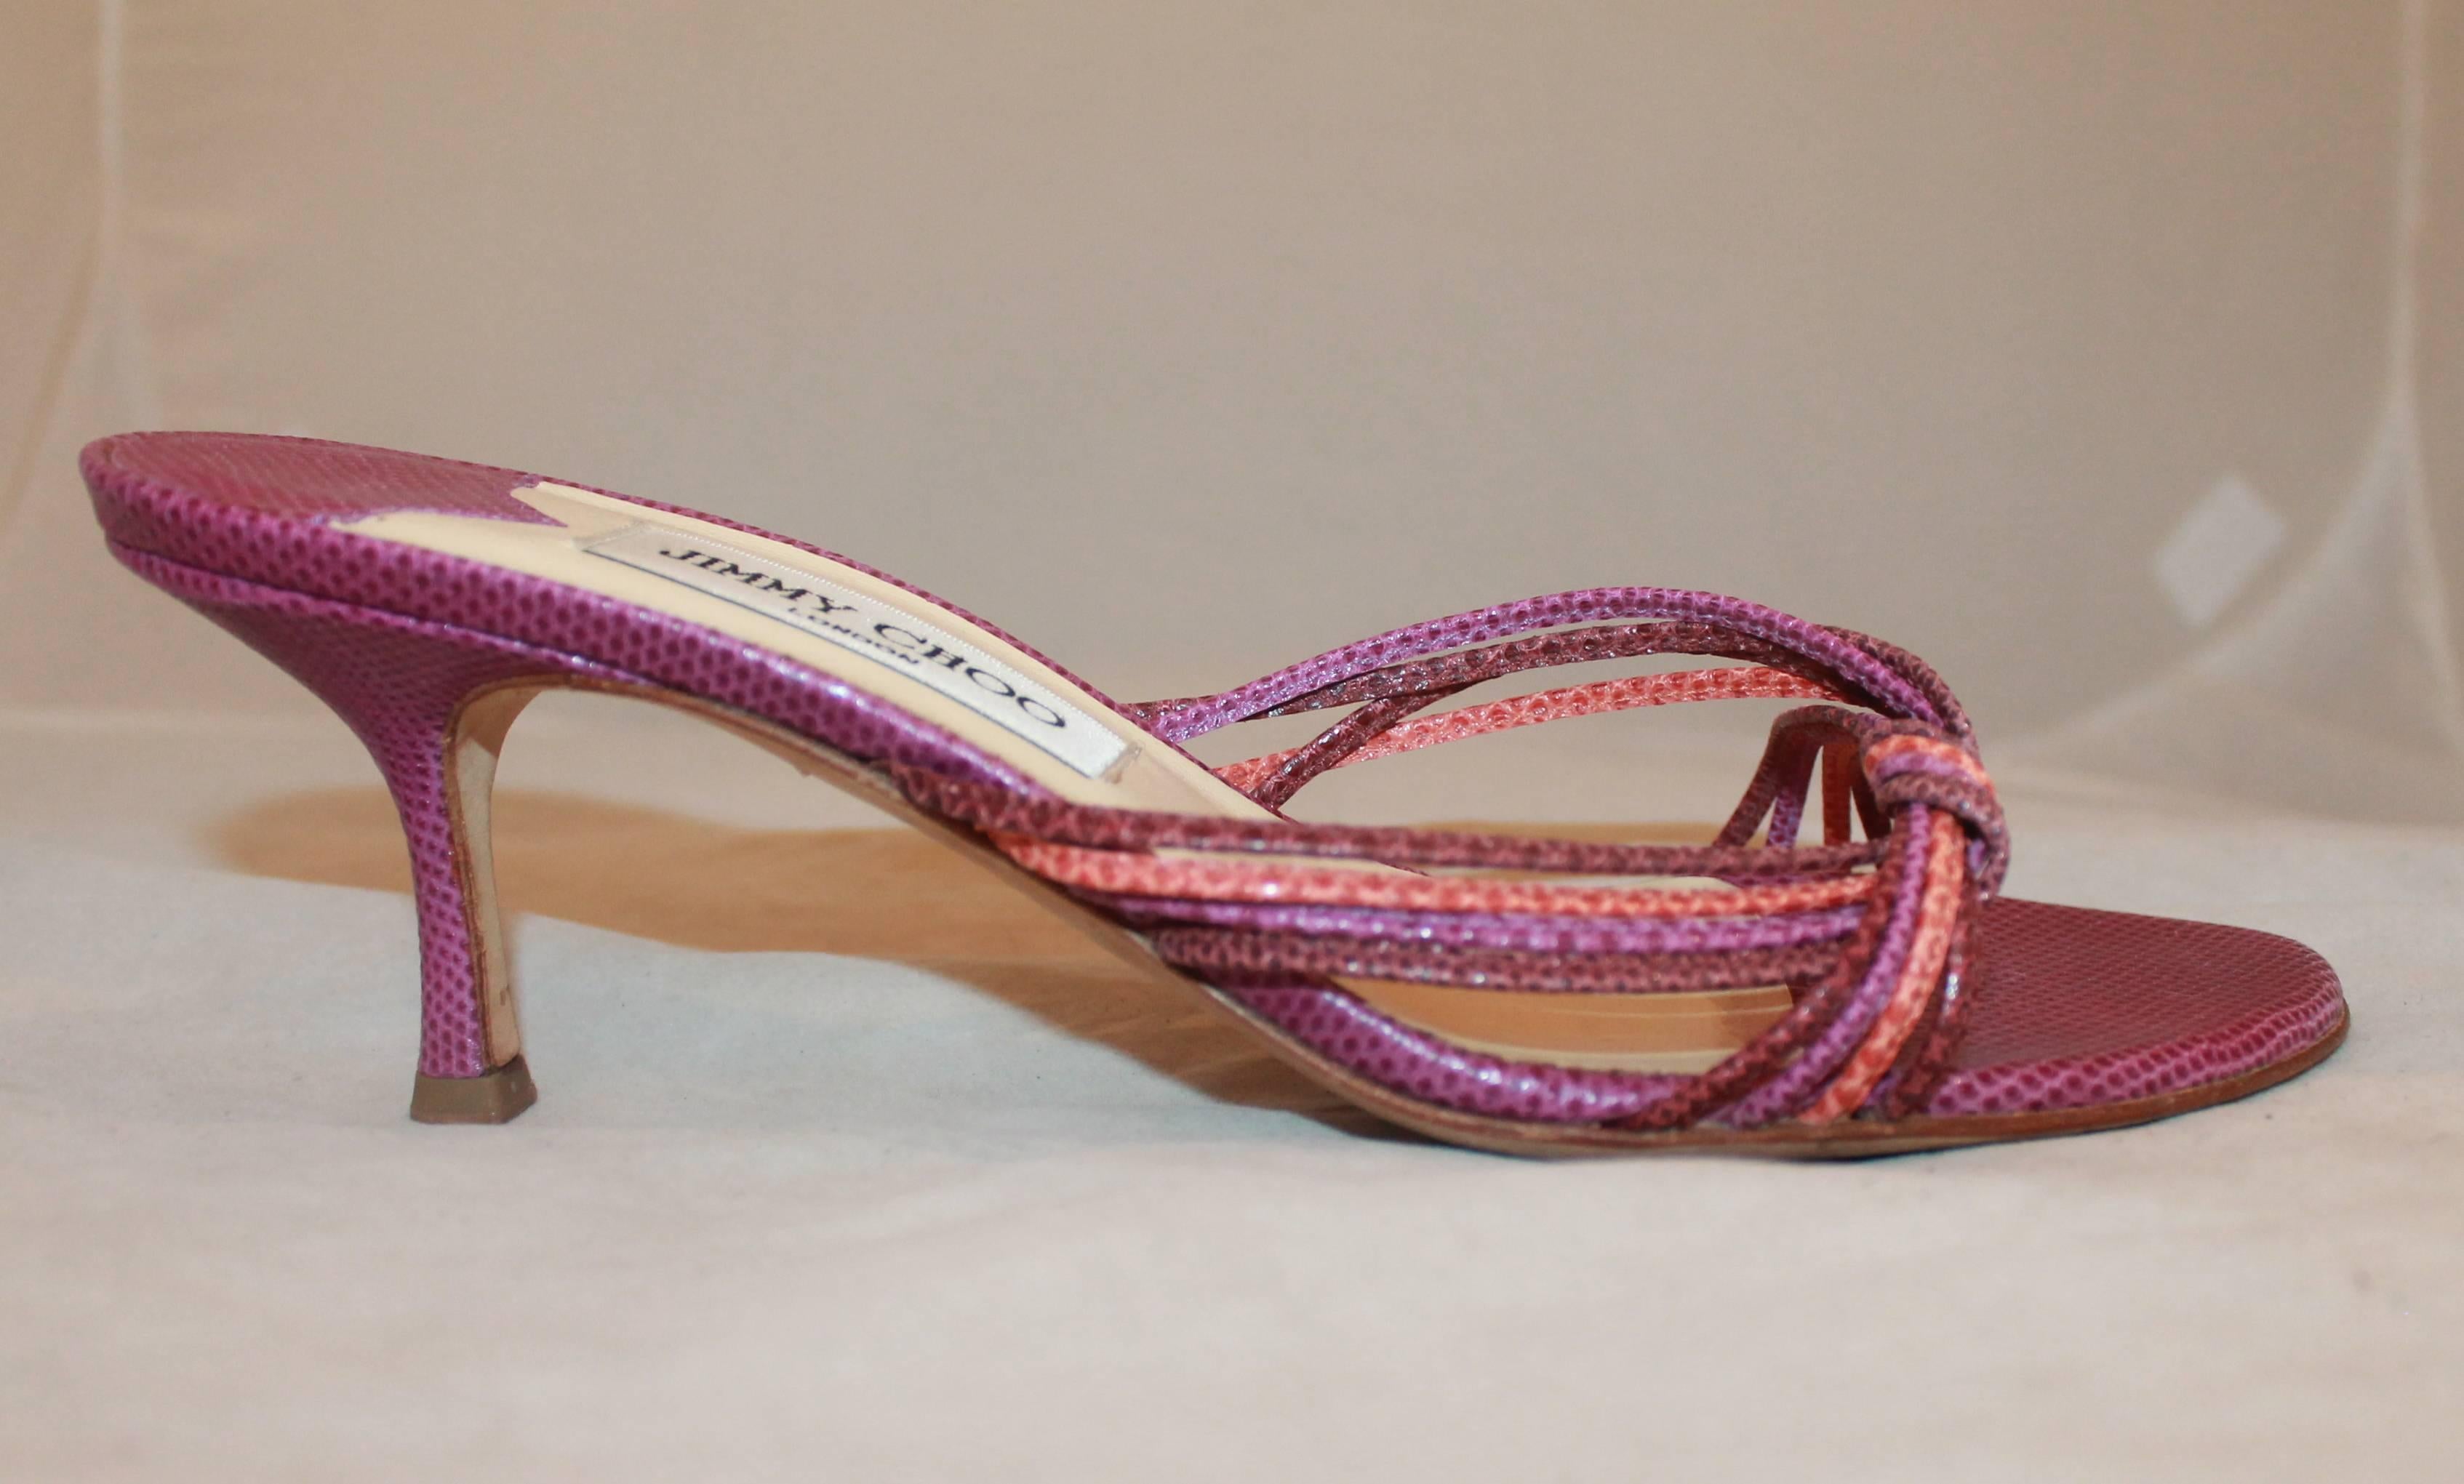 Jimmy Choo Purple and Coral Lizard Woven Slides with Heels - 39. These slides are purple lizard-skin with single-woven strips. They are in excellent condition and show only minor wear on the bottom.

Measurements:
Heel: 2.5